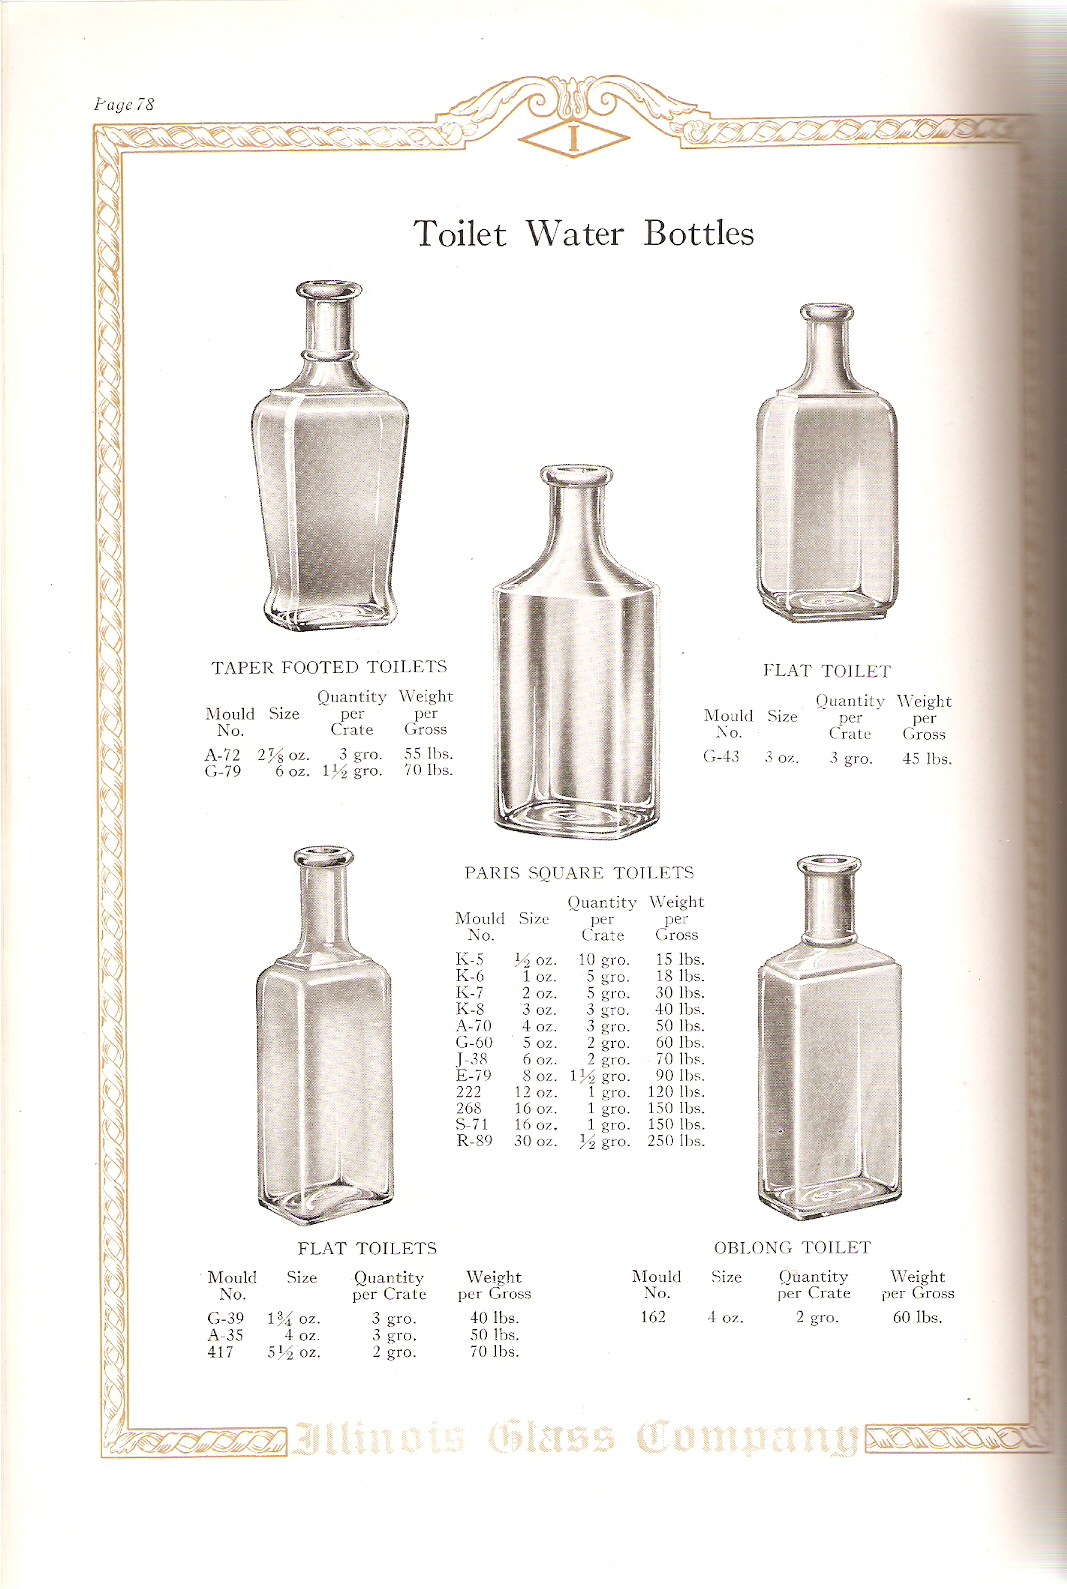 Page 78 - Toilet Water Bottles.